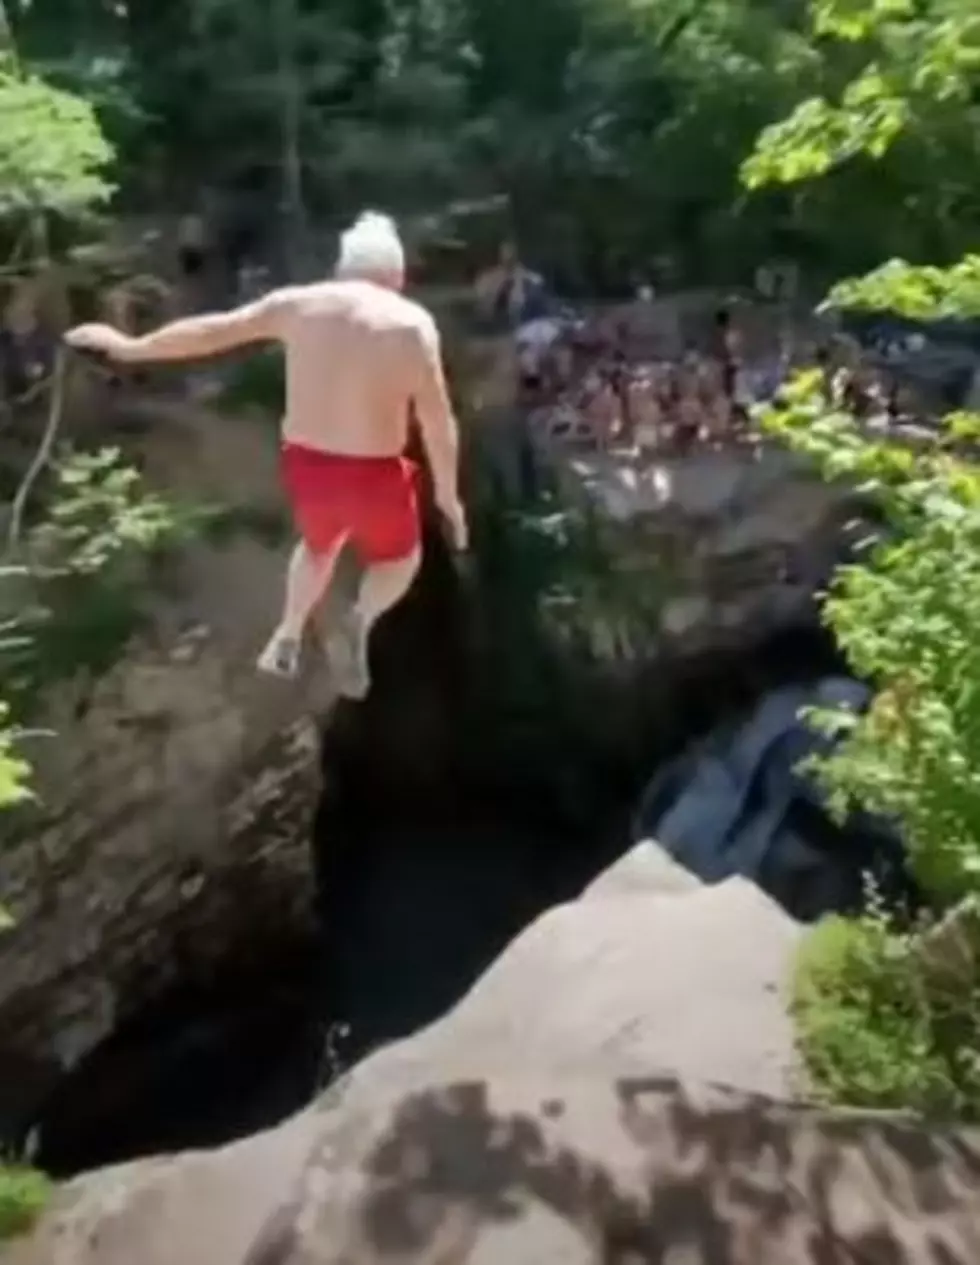 Over the Hill: Senior Man Cliff Dives the Catskills [Watch]